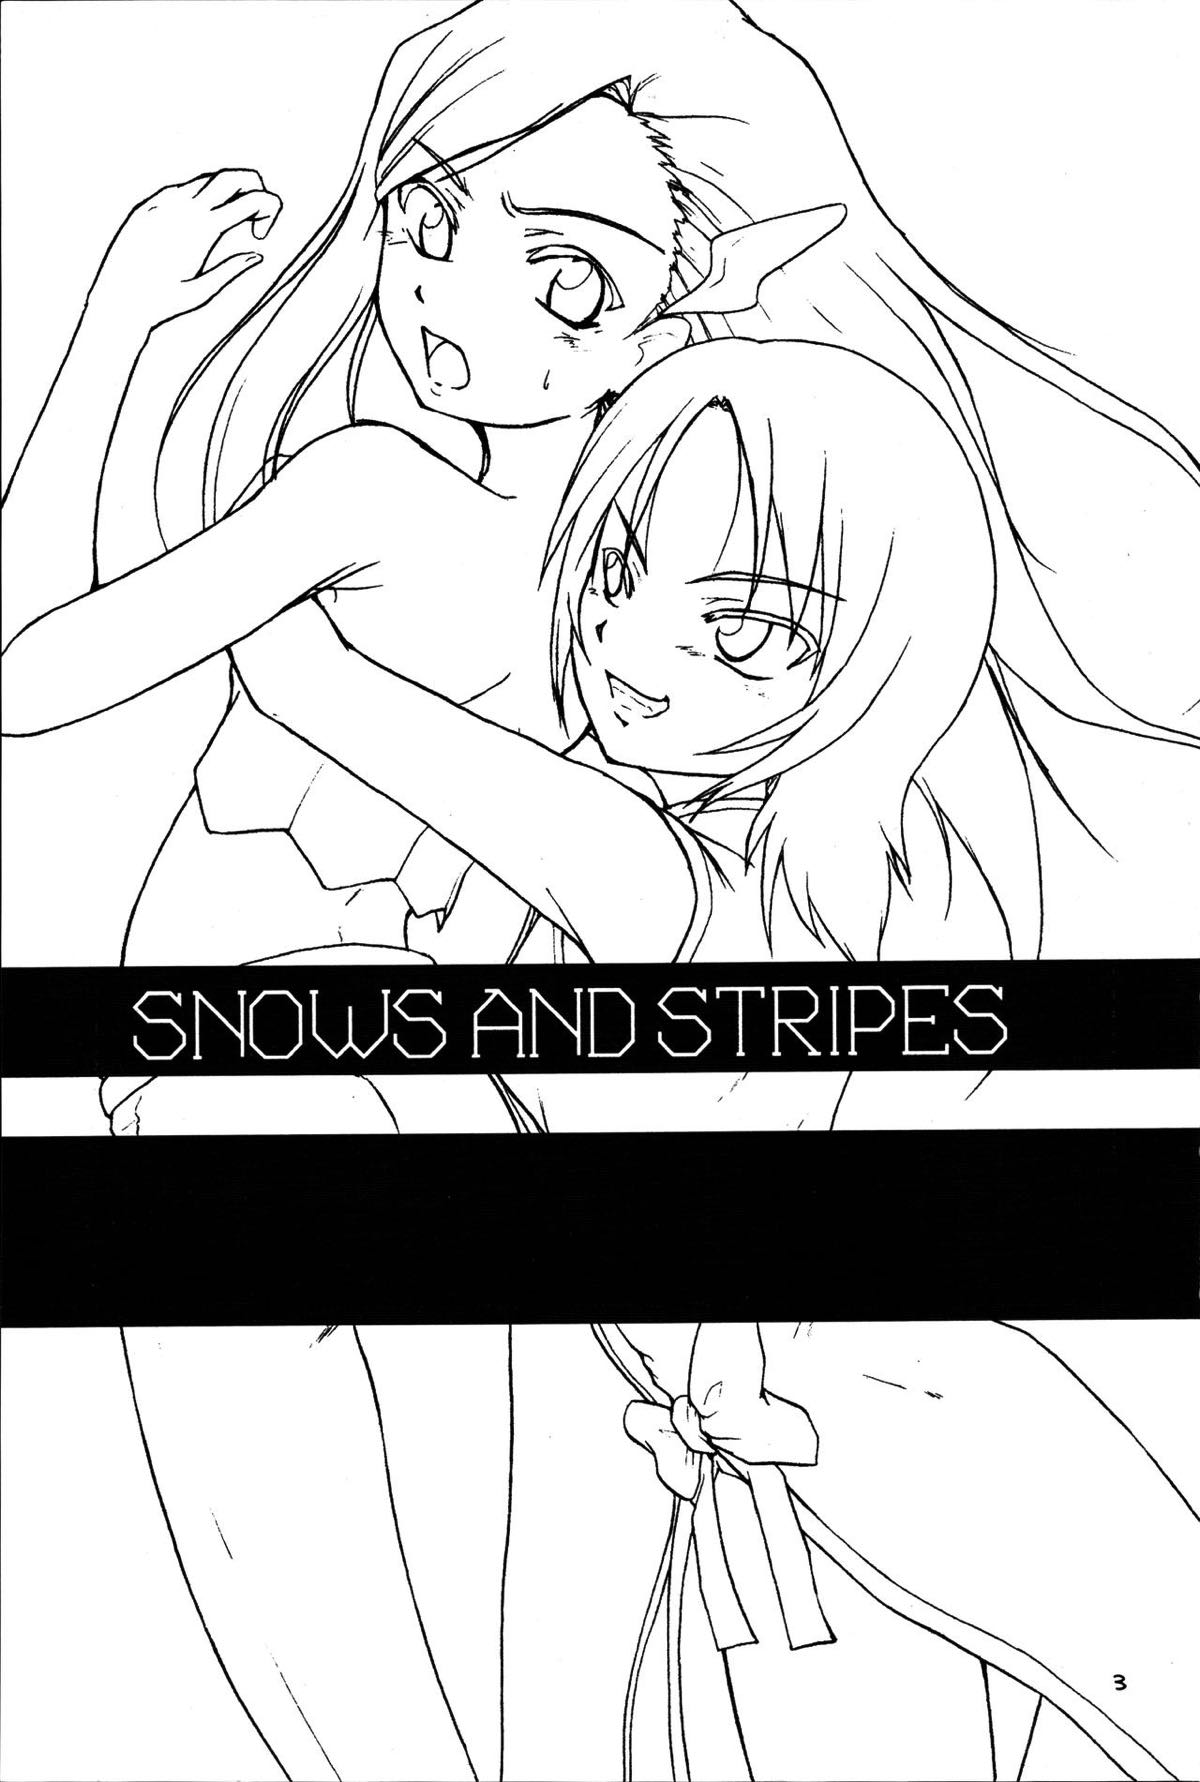 Snows and Stripes 2ページ